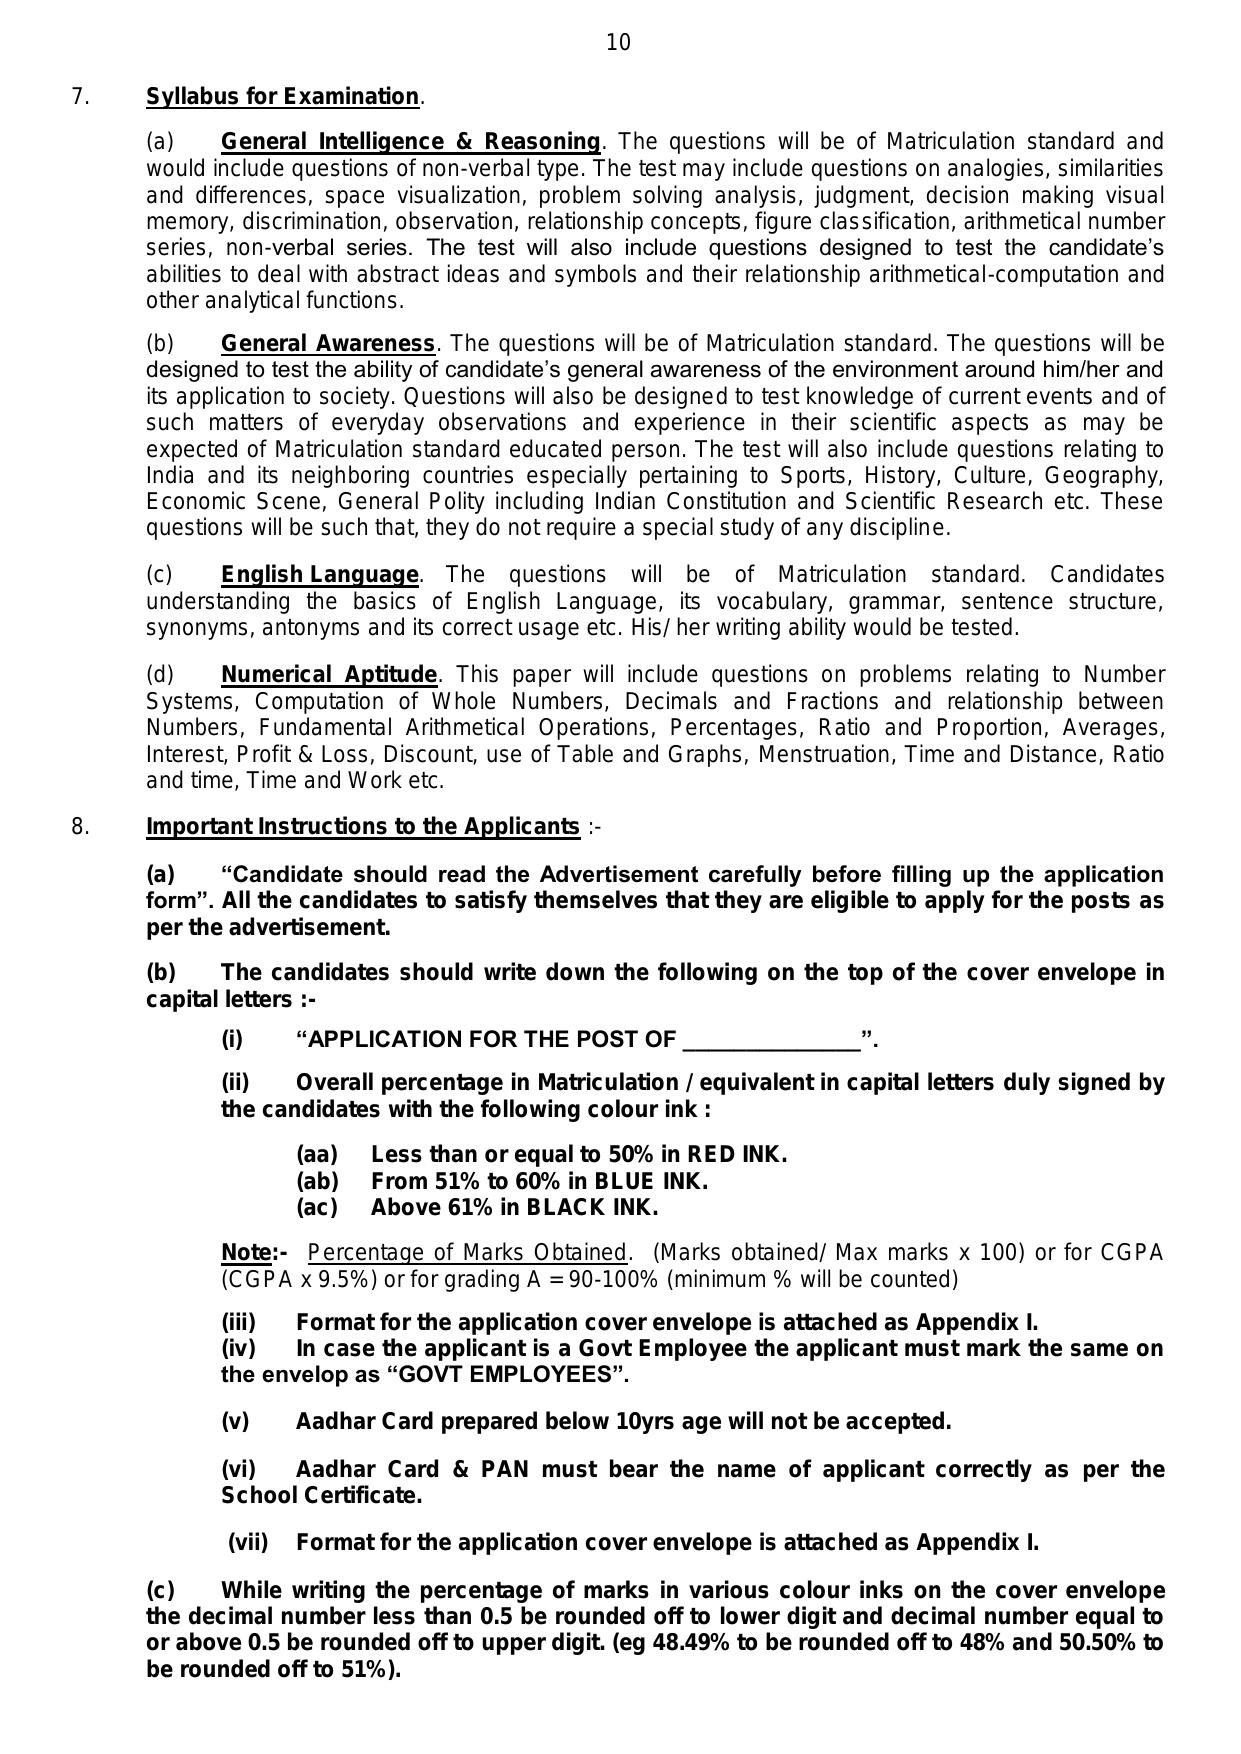 ASC Centre South 236 MTS, Fireman and Various Posts Recruitment 2023 - Page 8